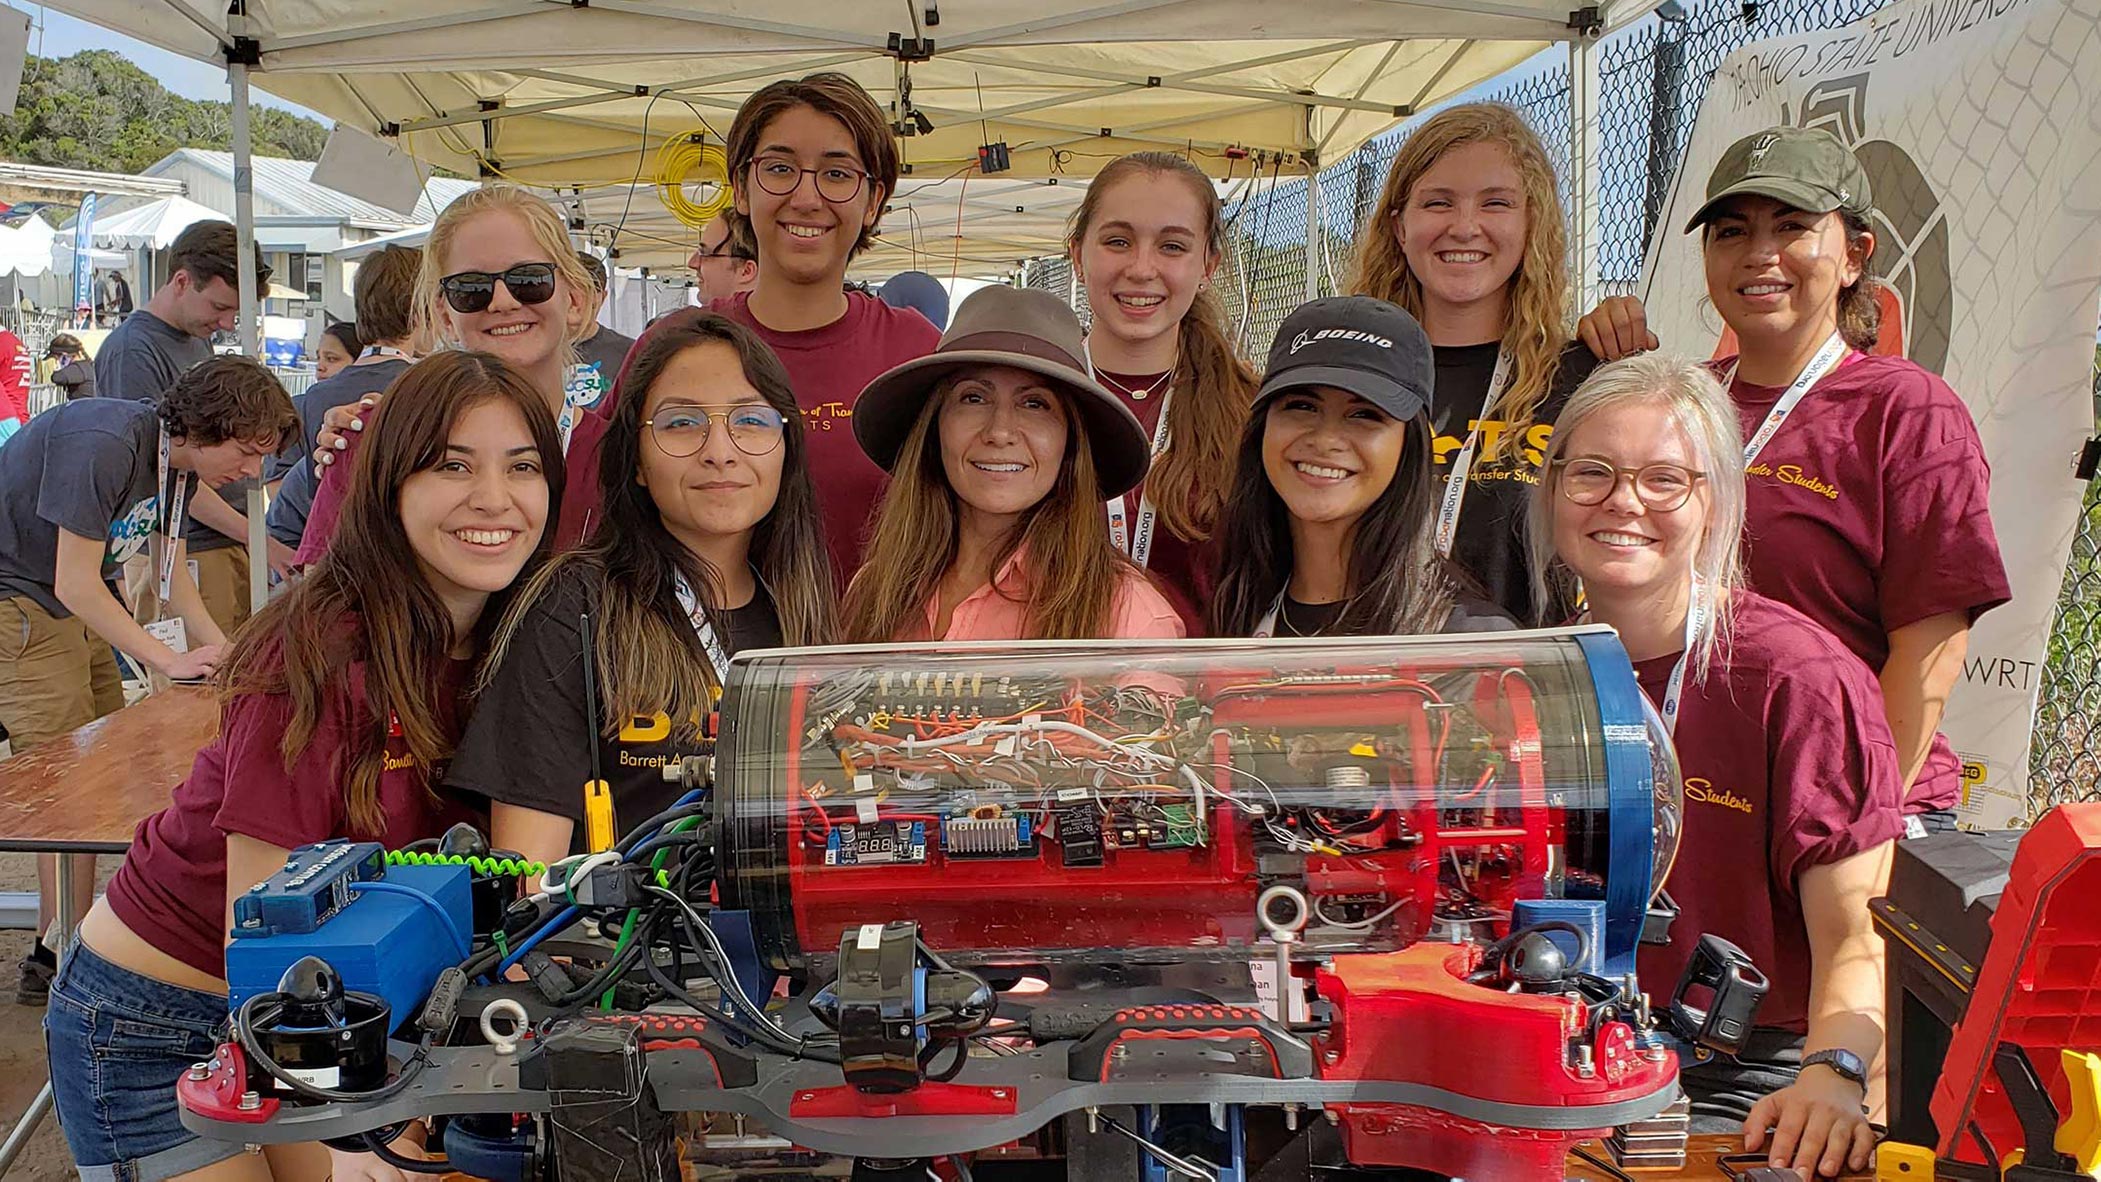 The all-women Desert WAVE underwater robotics team poses for a team photo with their robot